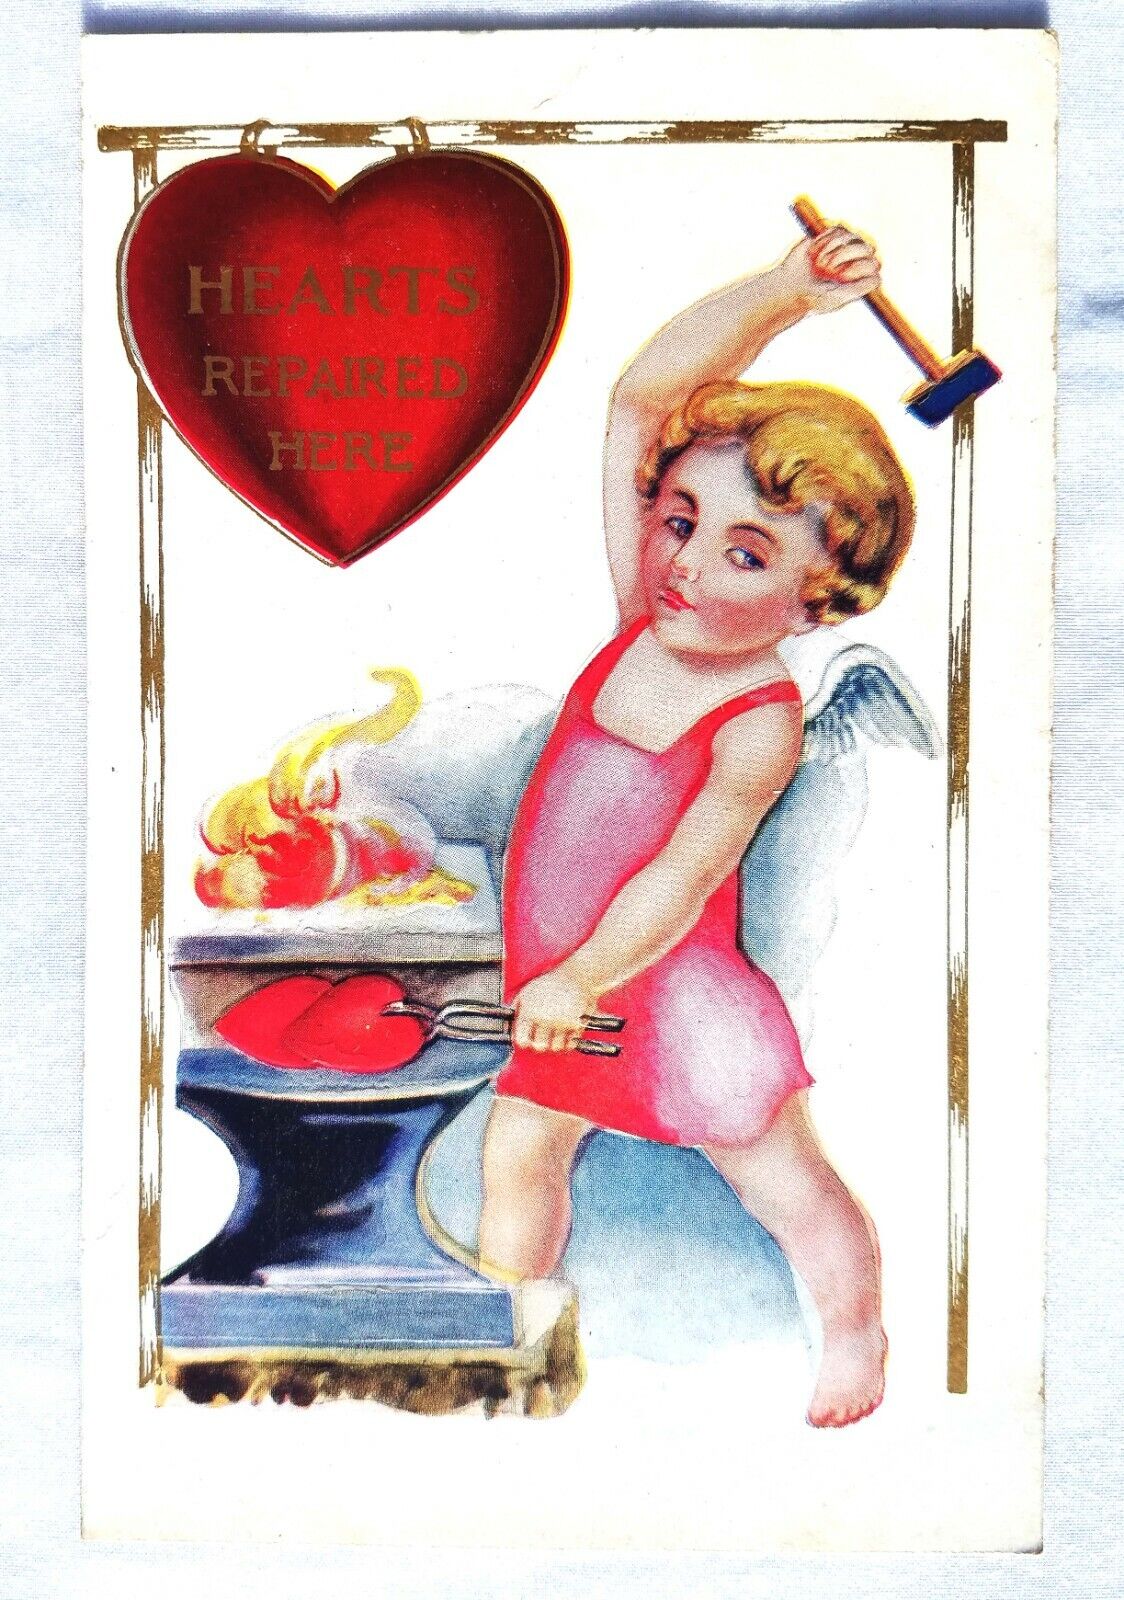  Vintage HEARTS REPAIRED HERE for Broken Hearts VALENTINES DAY Postcard Cupid